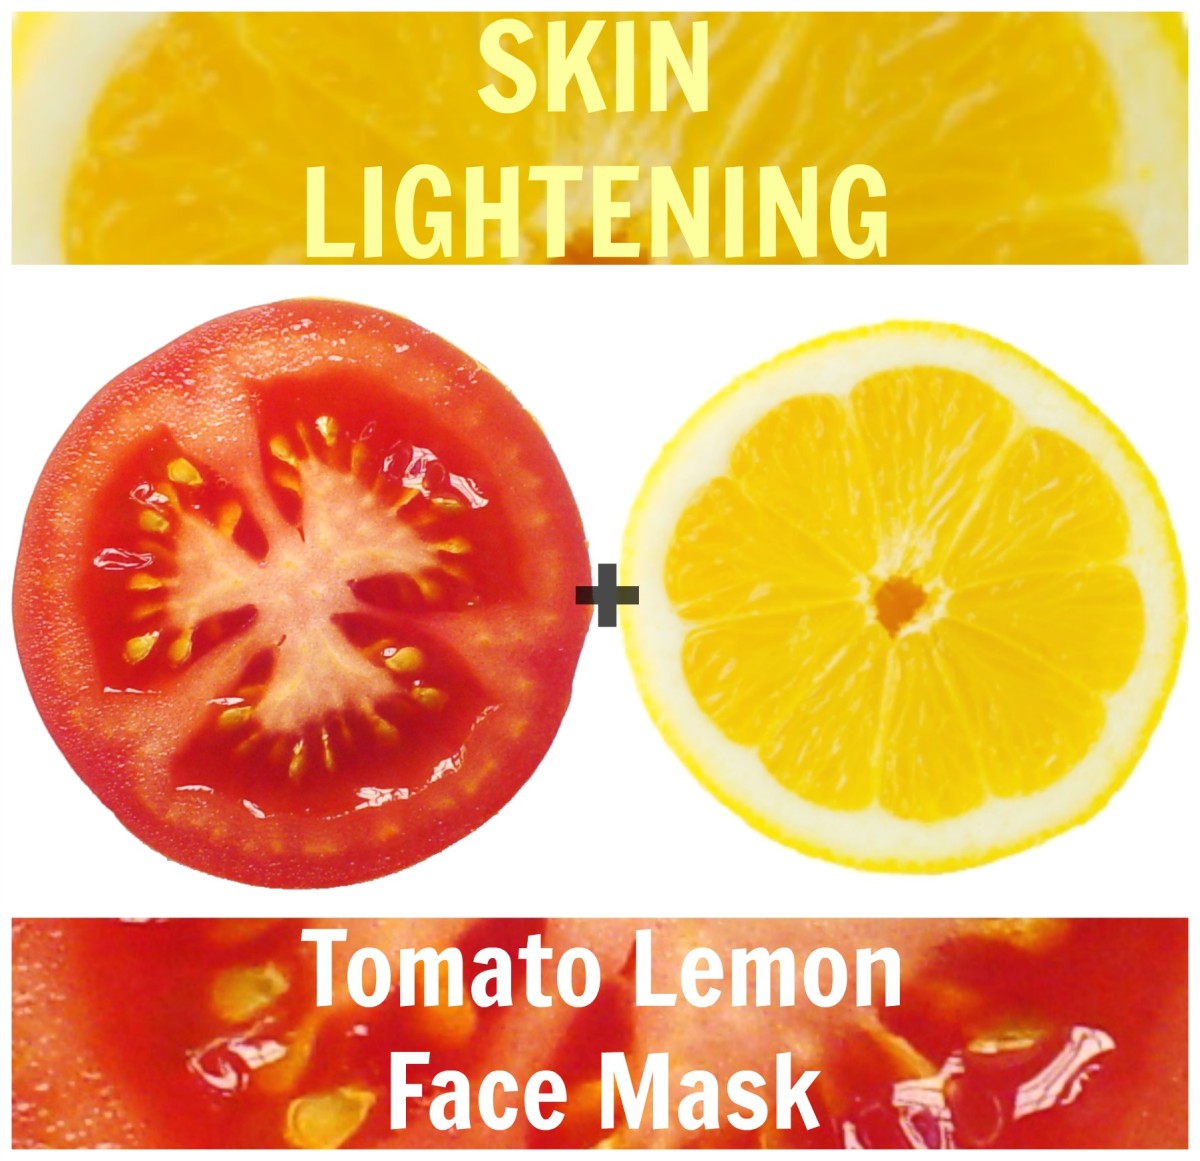 Use the two-power combo of lemon and tomato to reap impeccably bright and fresh skin. This is for those who want to lighten their skin naturally.